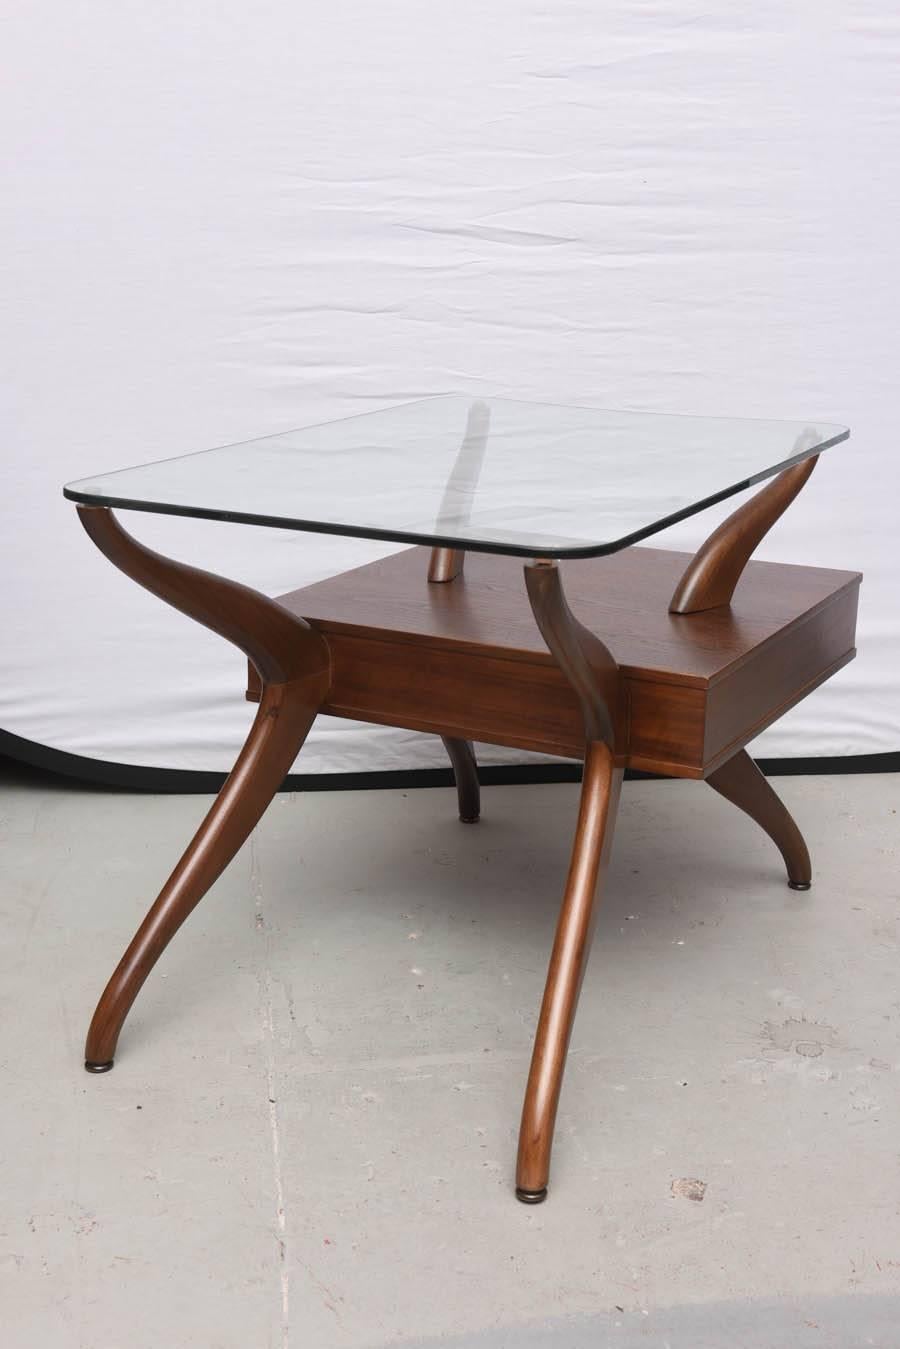 Pair of End Tables in Glass and Walnut, 1950s, USA For Sale 1